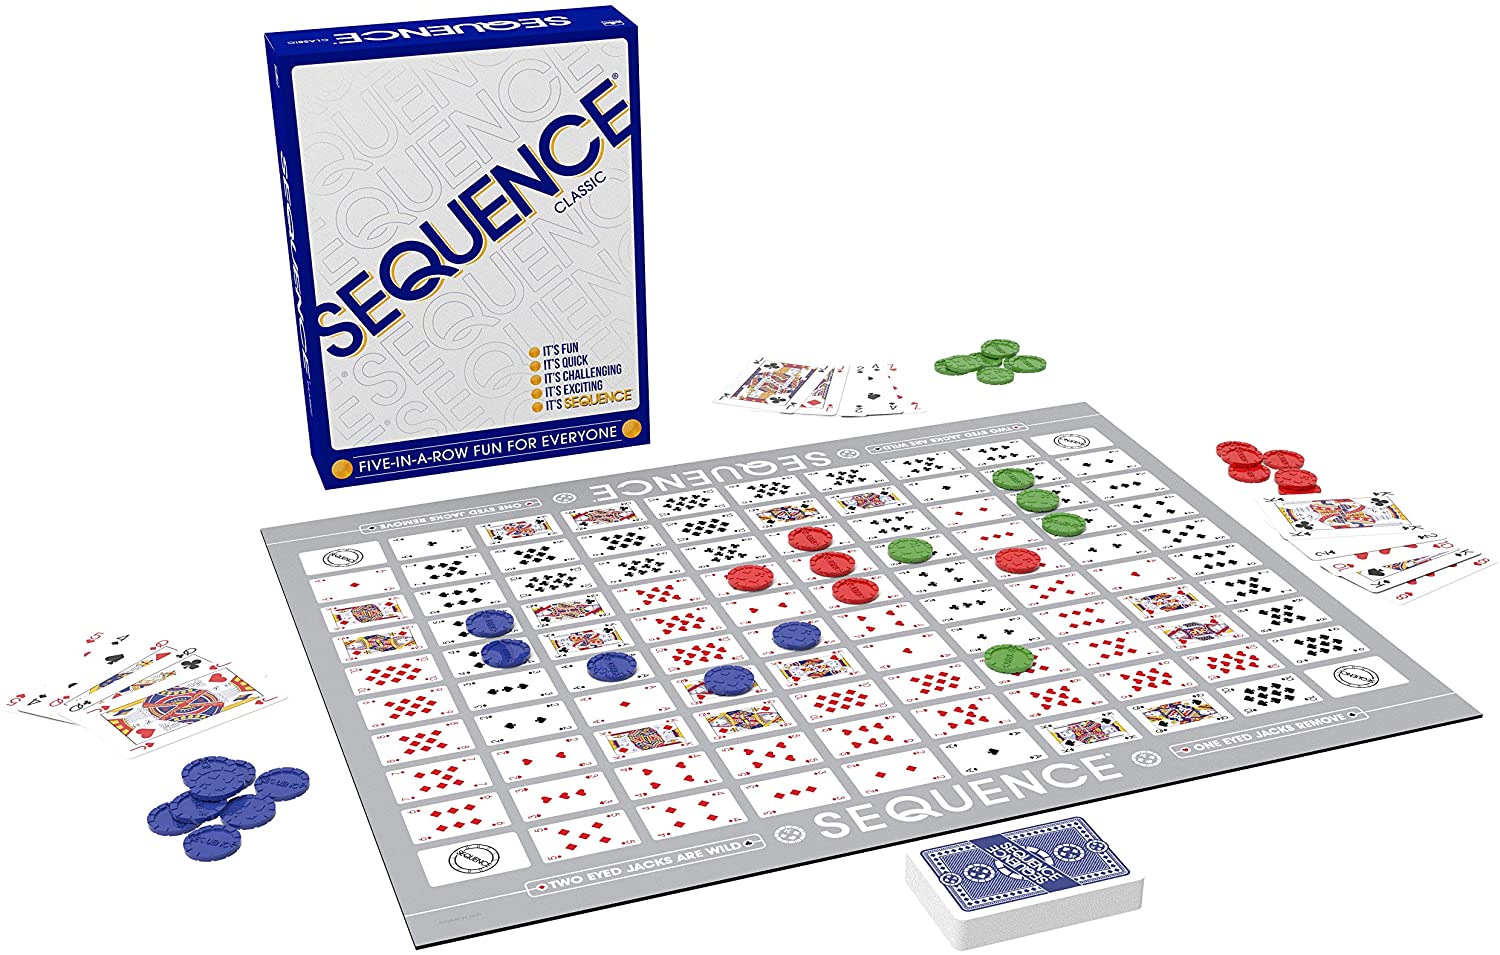 online sequence board game